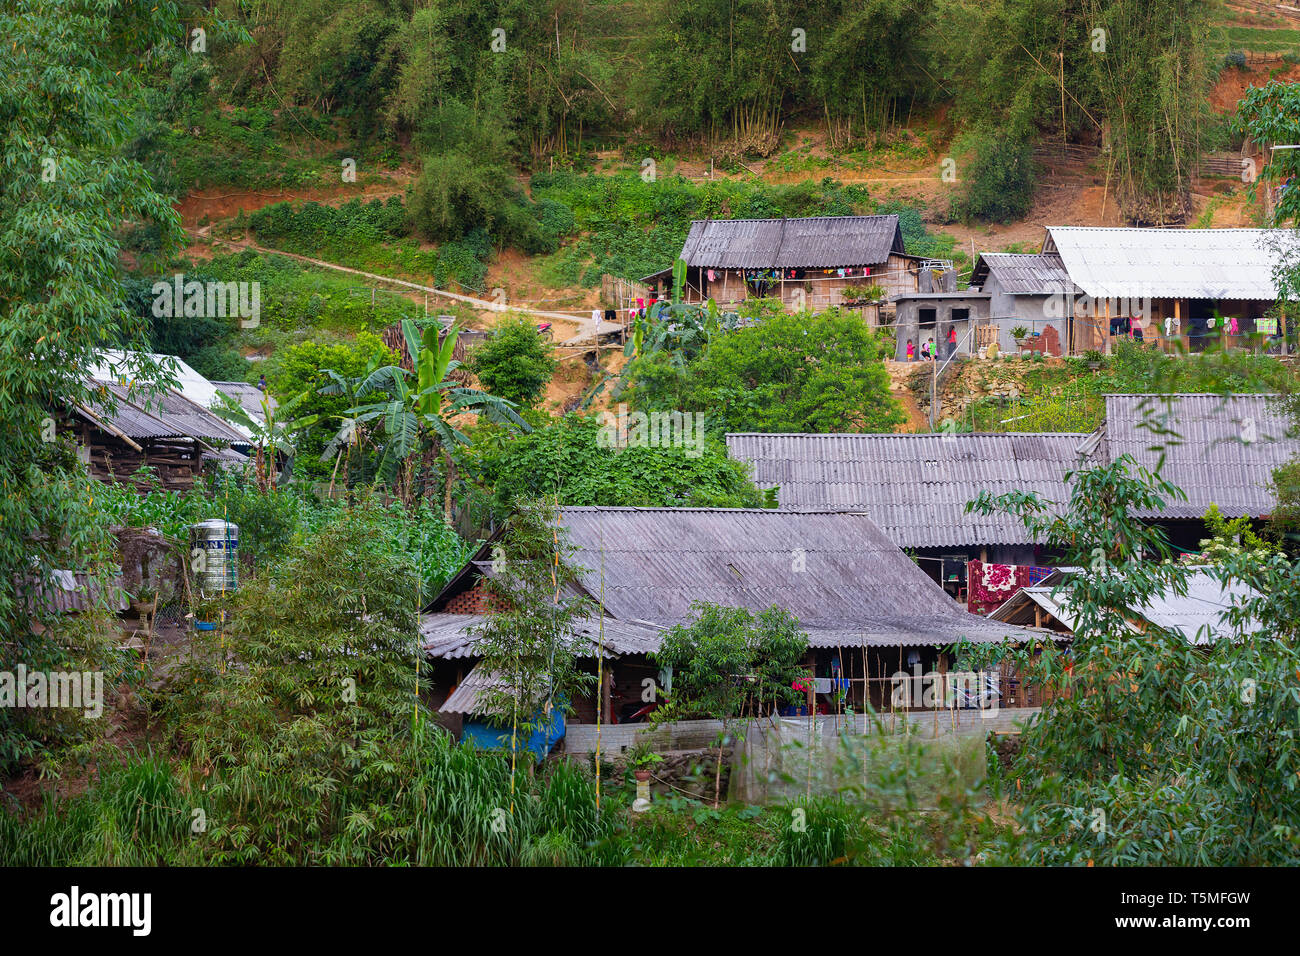 Small community village in rural mountains of SaPa, Vietnam, Asia Stock Photo